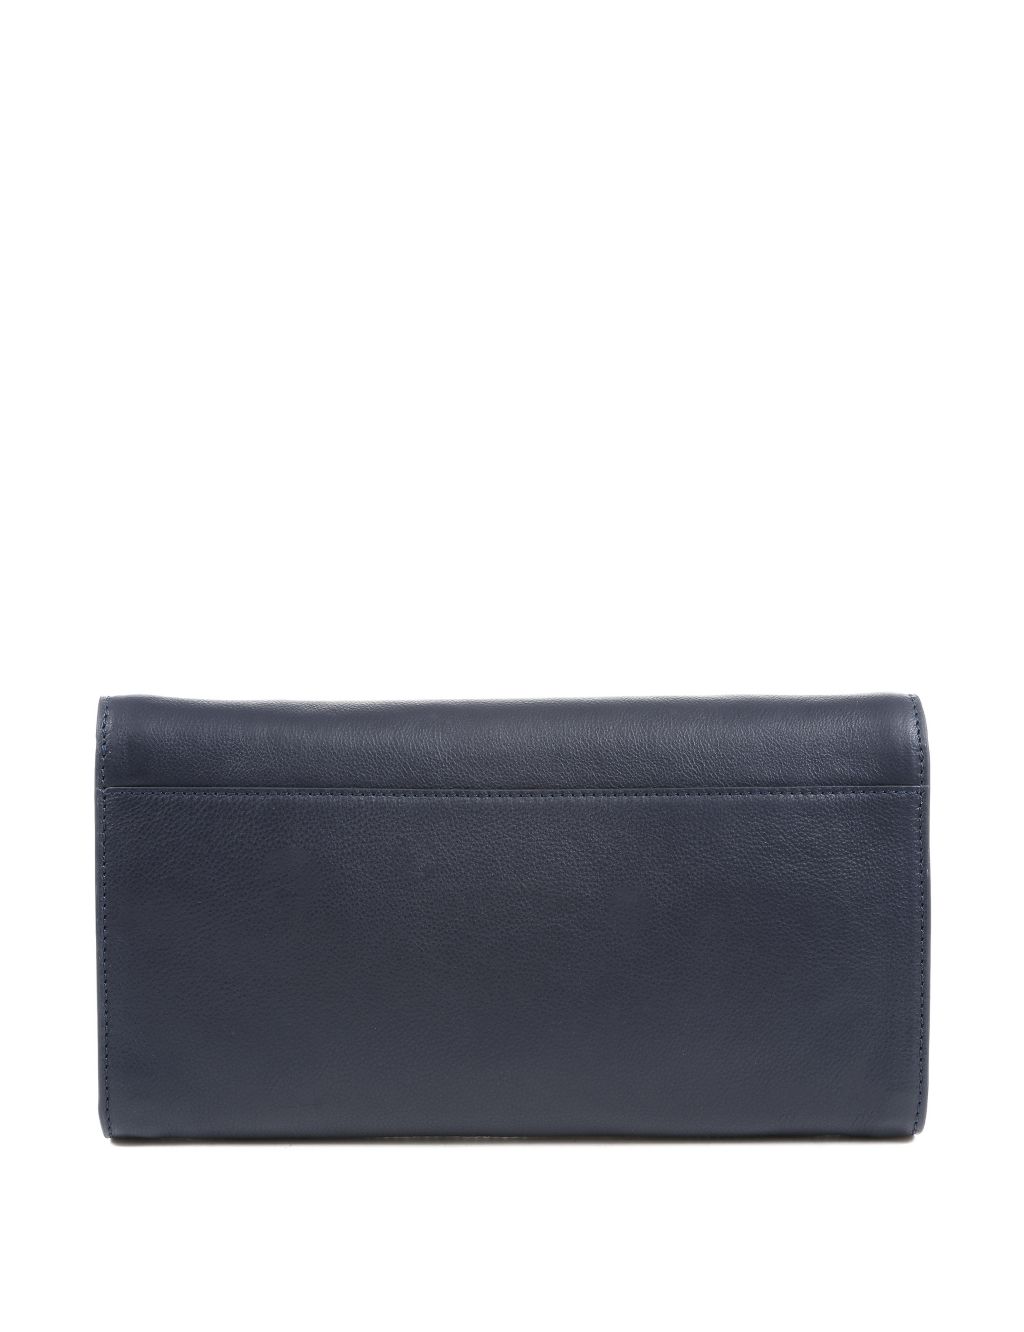 Leather Chain Strap Clutch Bag image 3